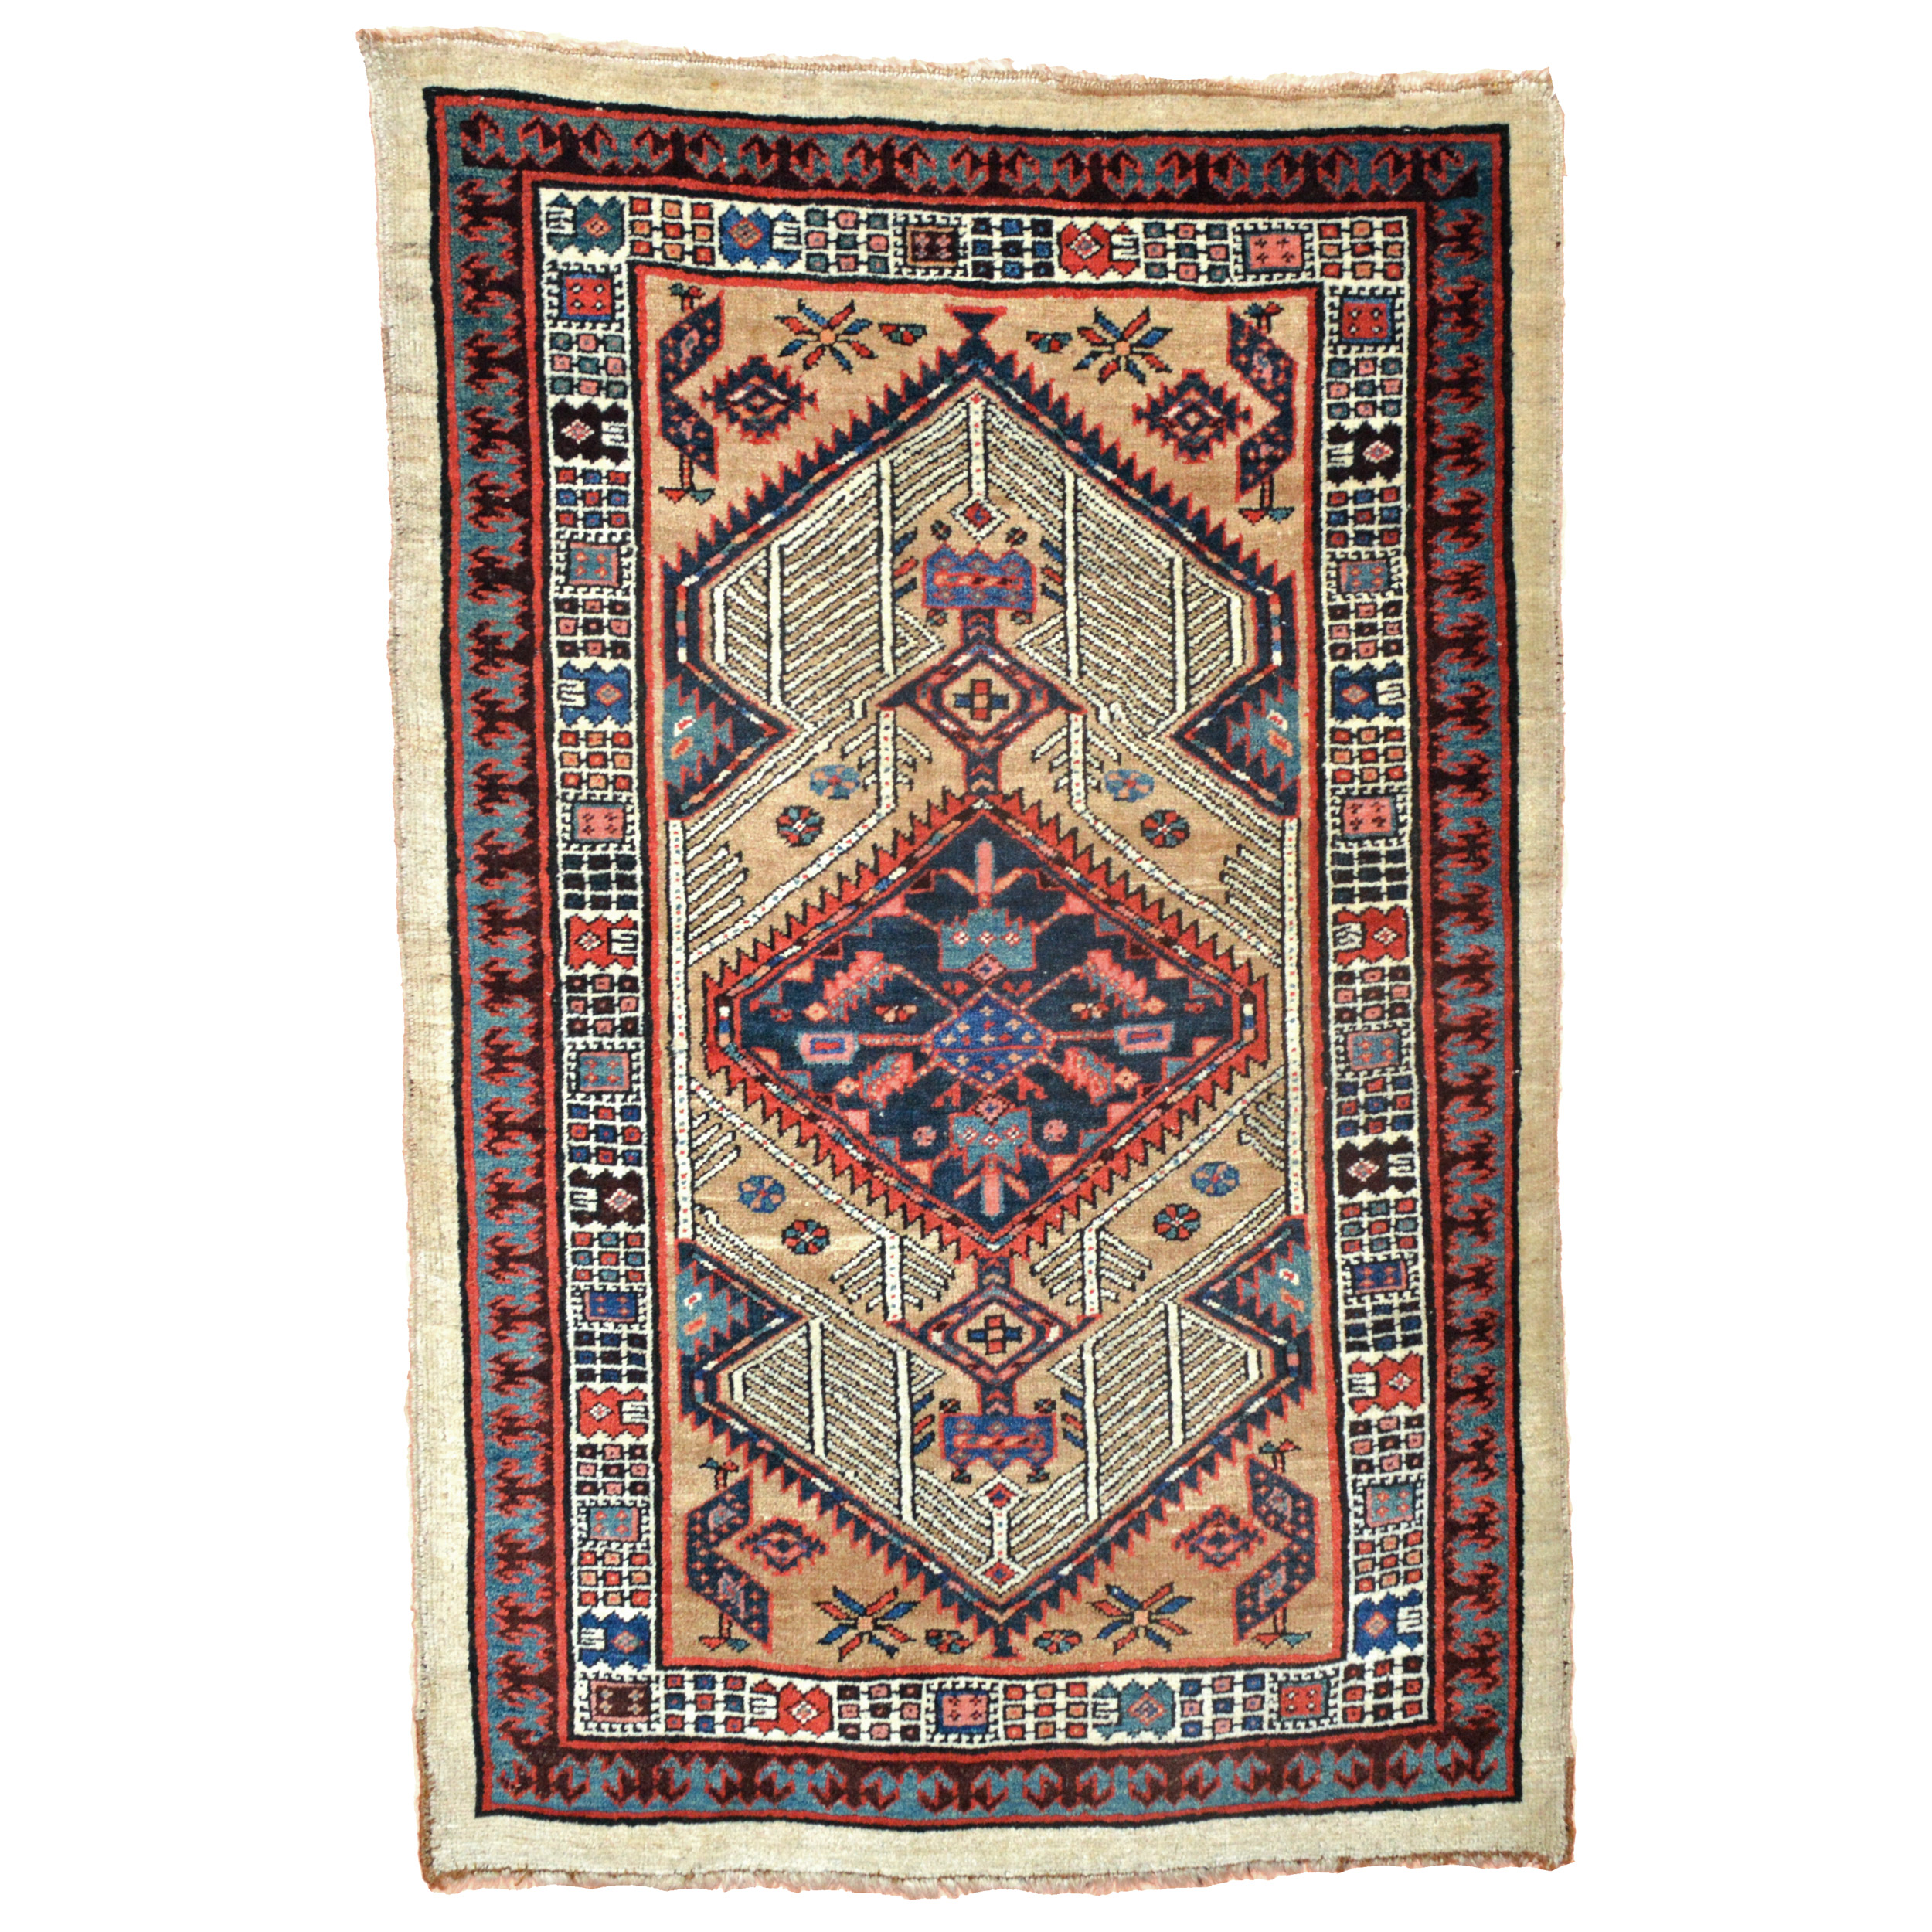 Antique Serab rug with a navy medallion on a classic camel color field, northwest Persia, circa 1920 - Douglas Stock Gallery, South Natick,MA antique rugs Boston,MA area